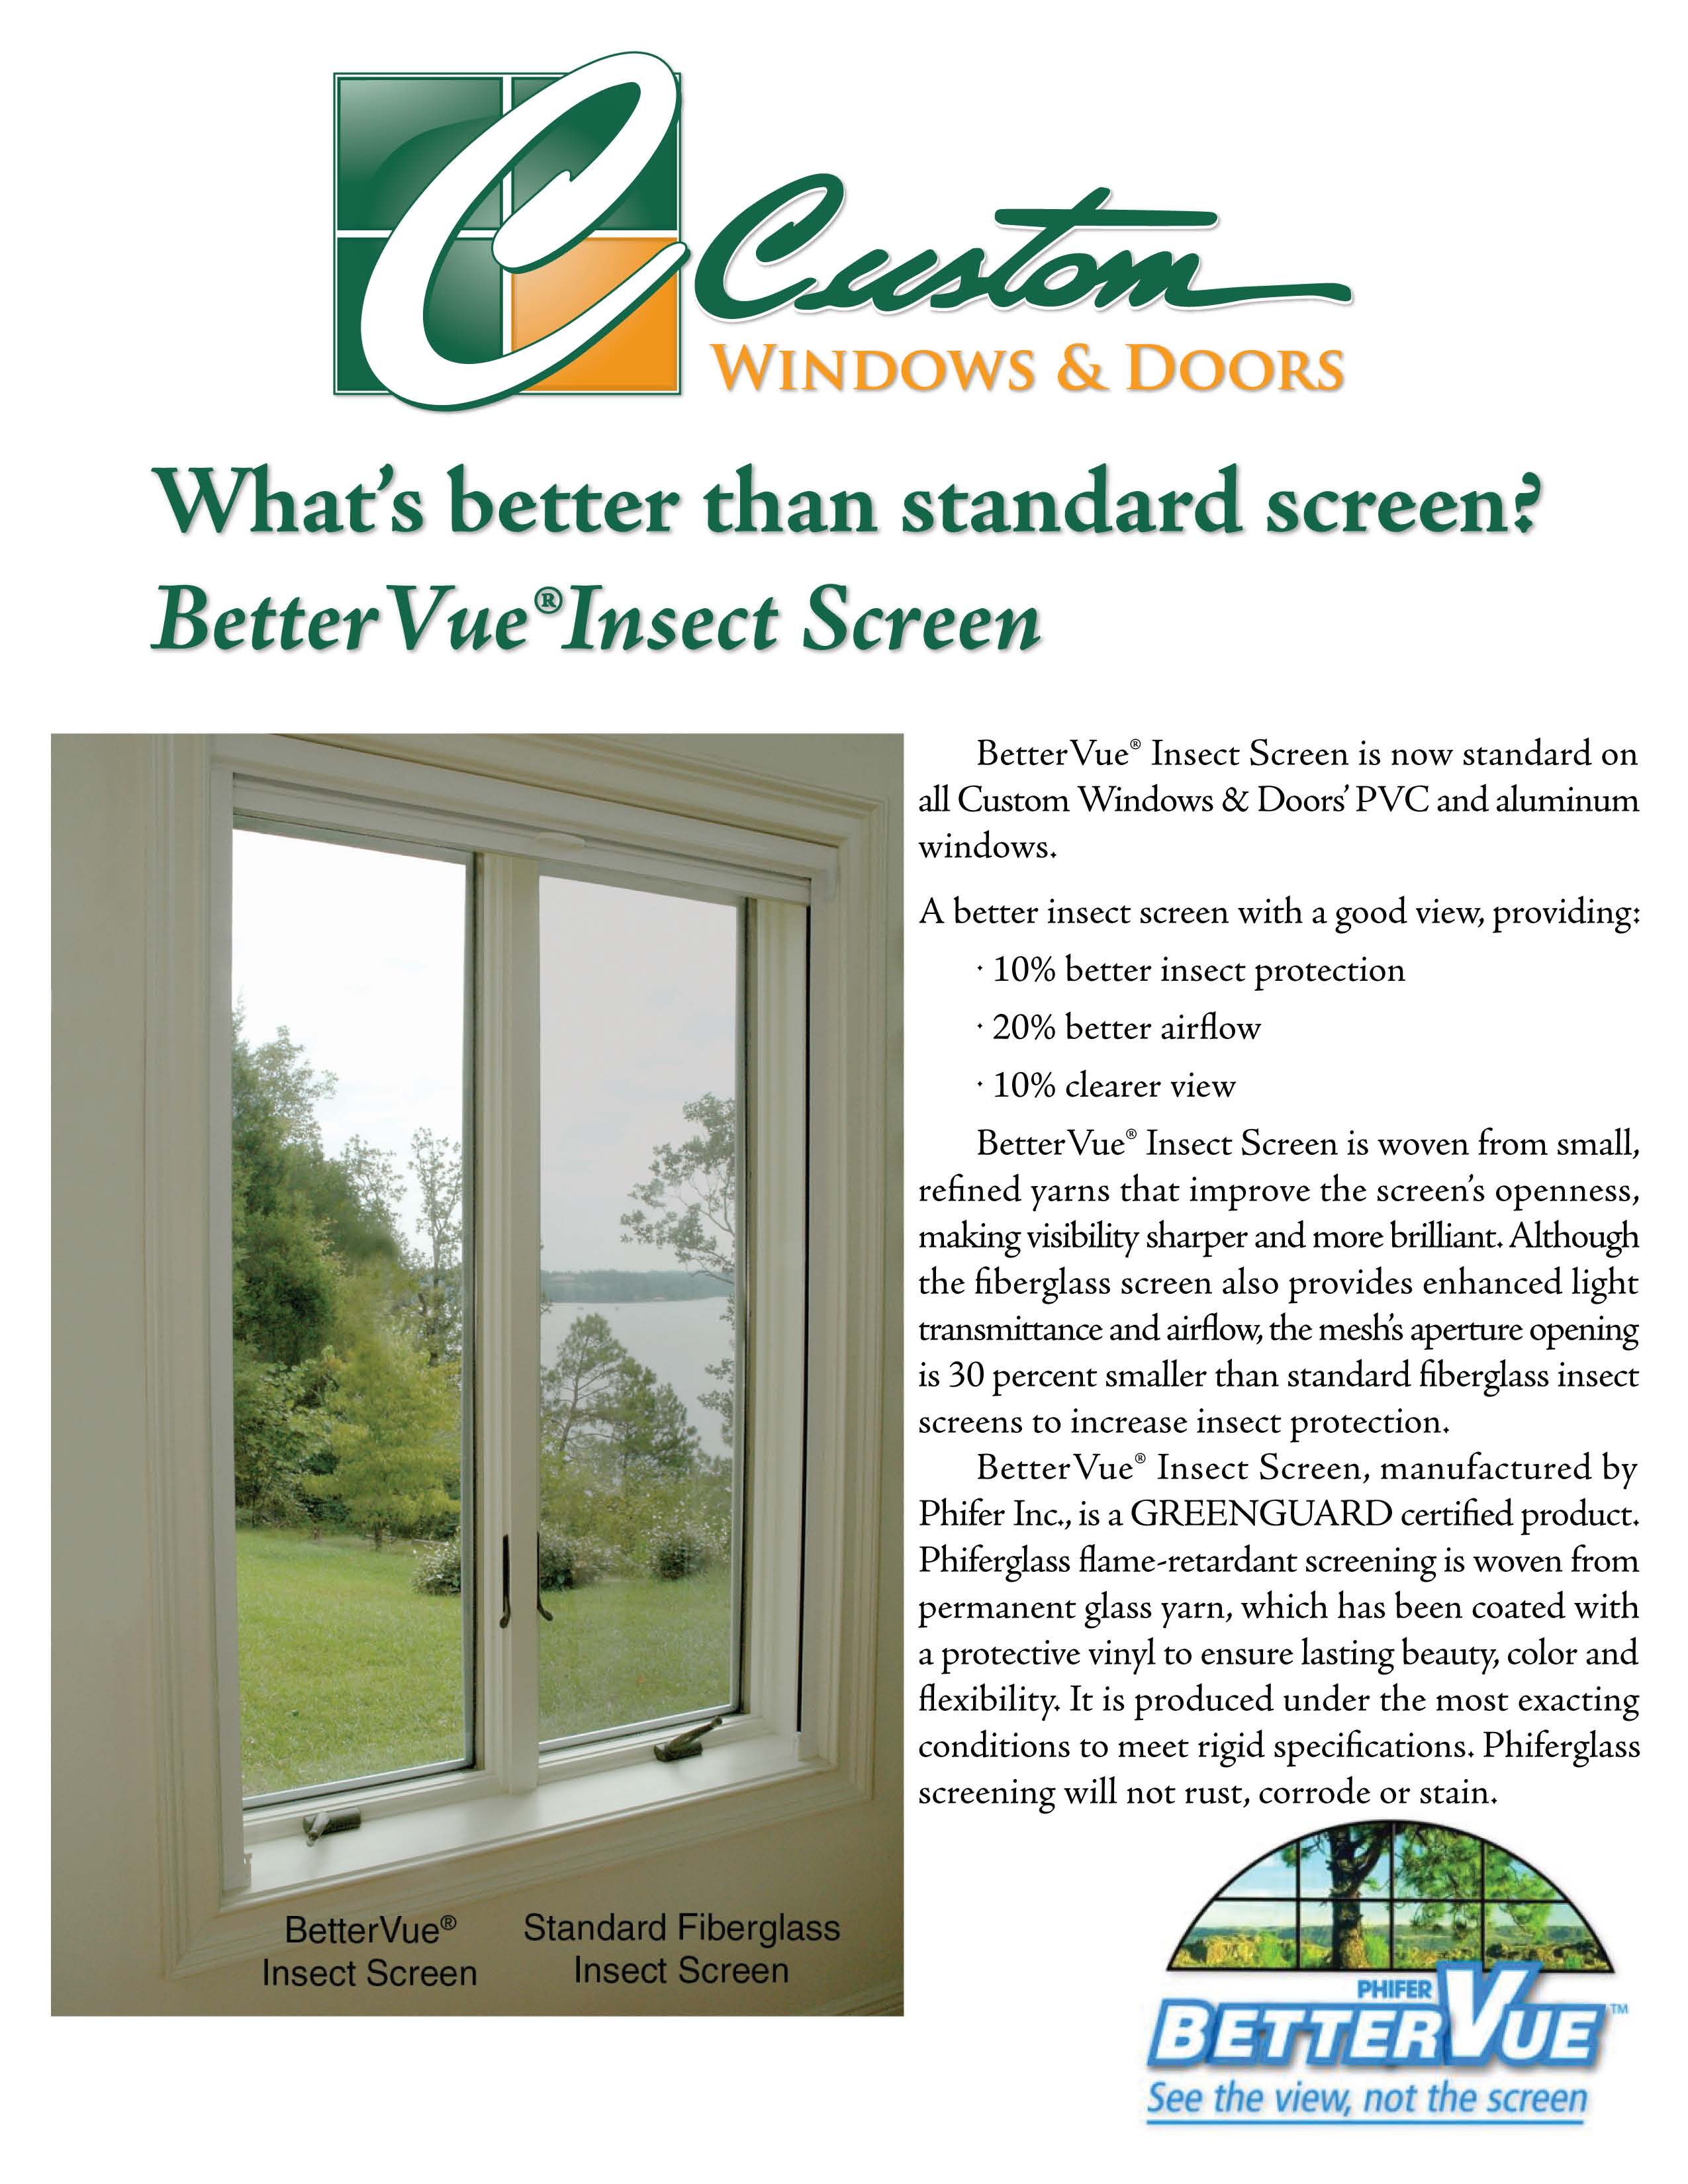 BetterVue Insect Screen